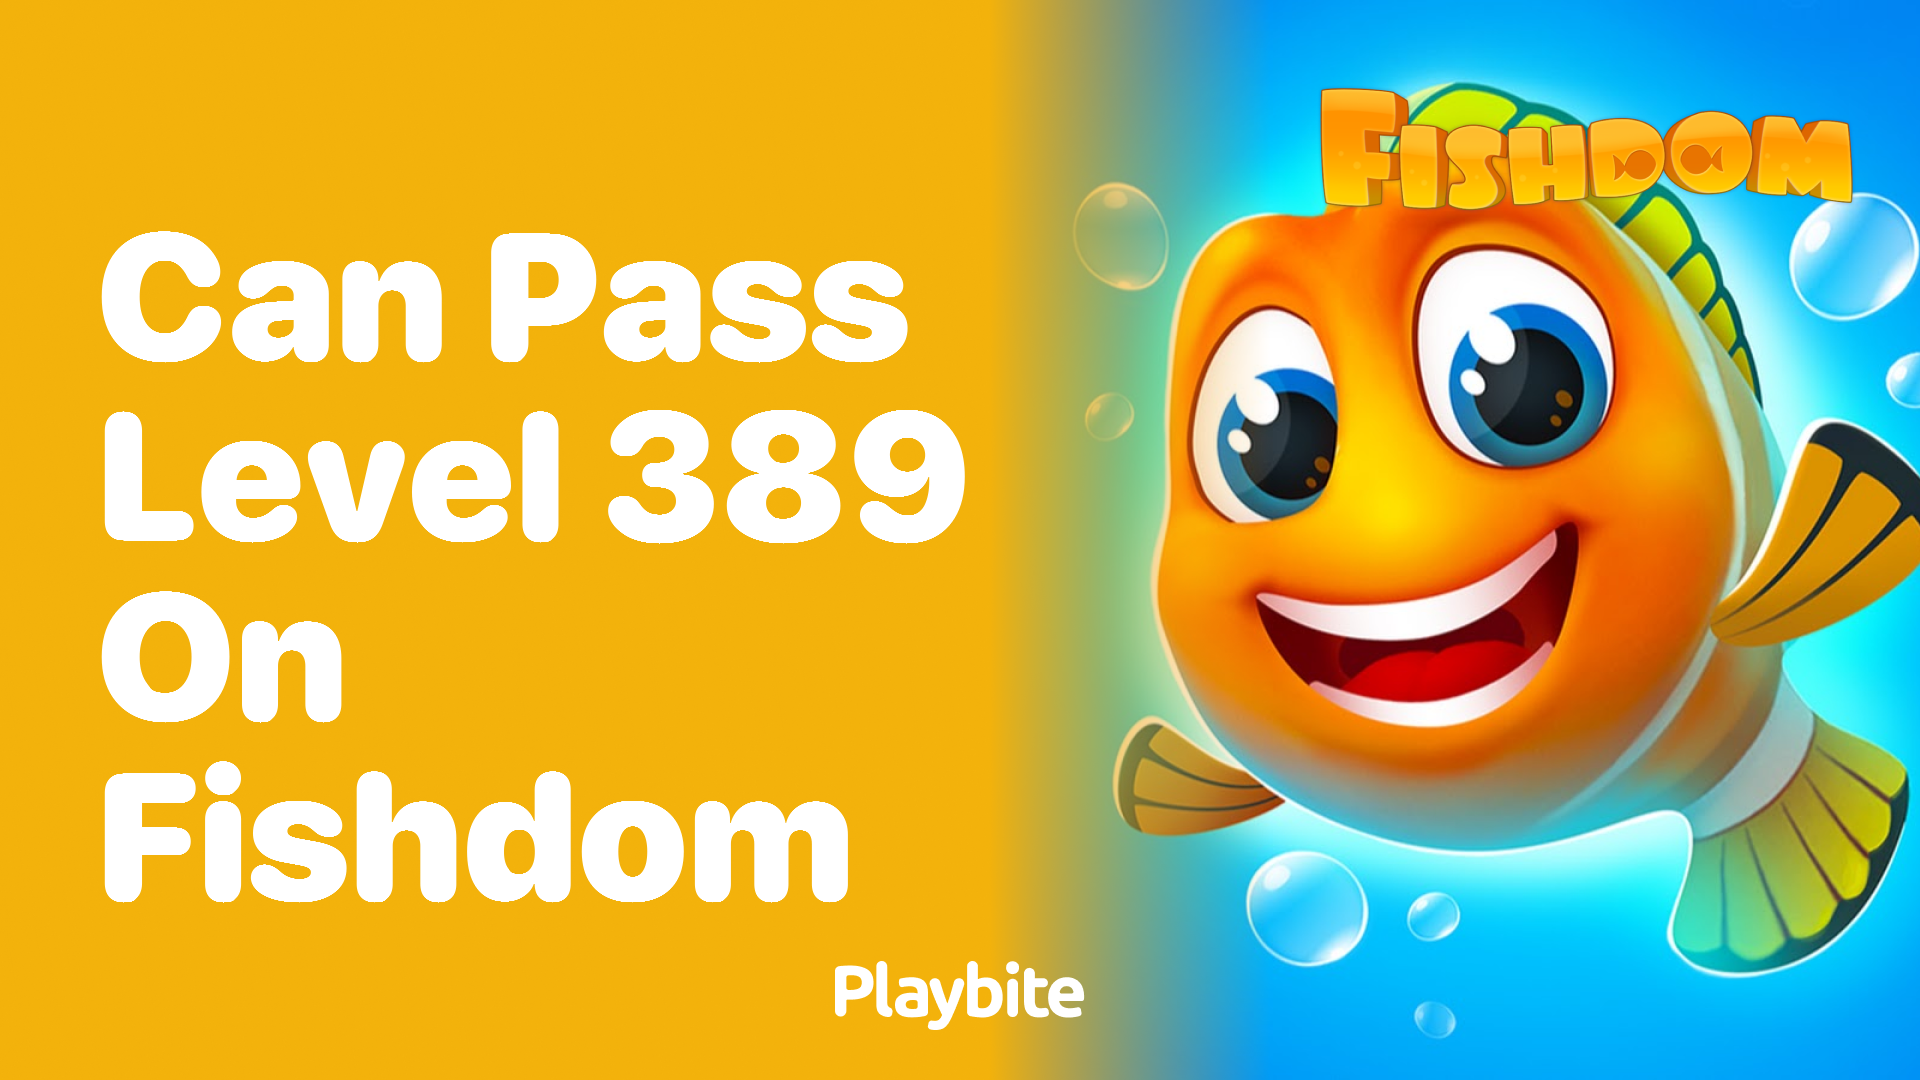 Can You Pass Level 389 on Fishdom? Find Out How!